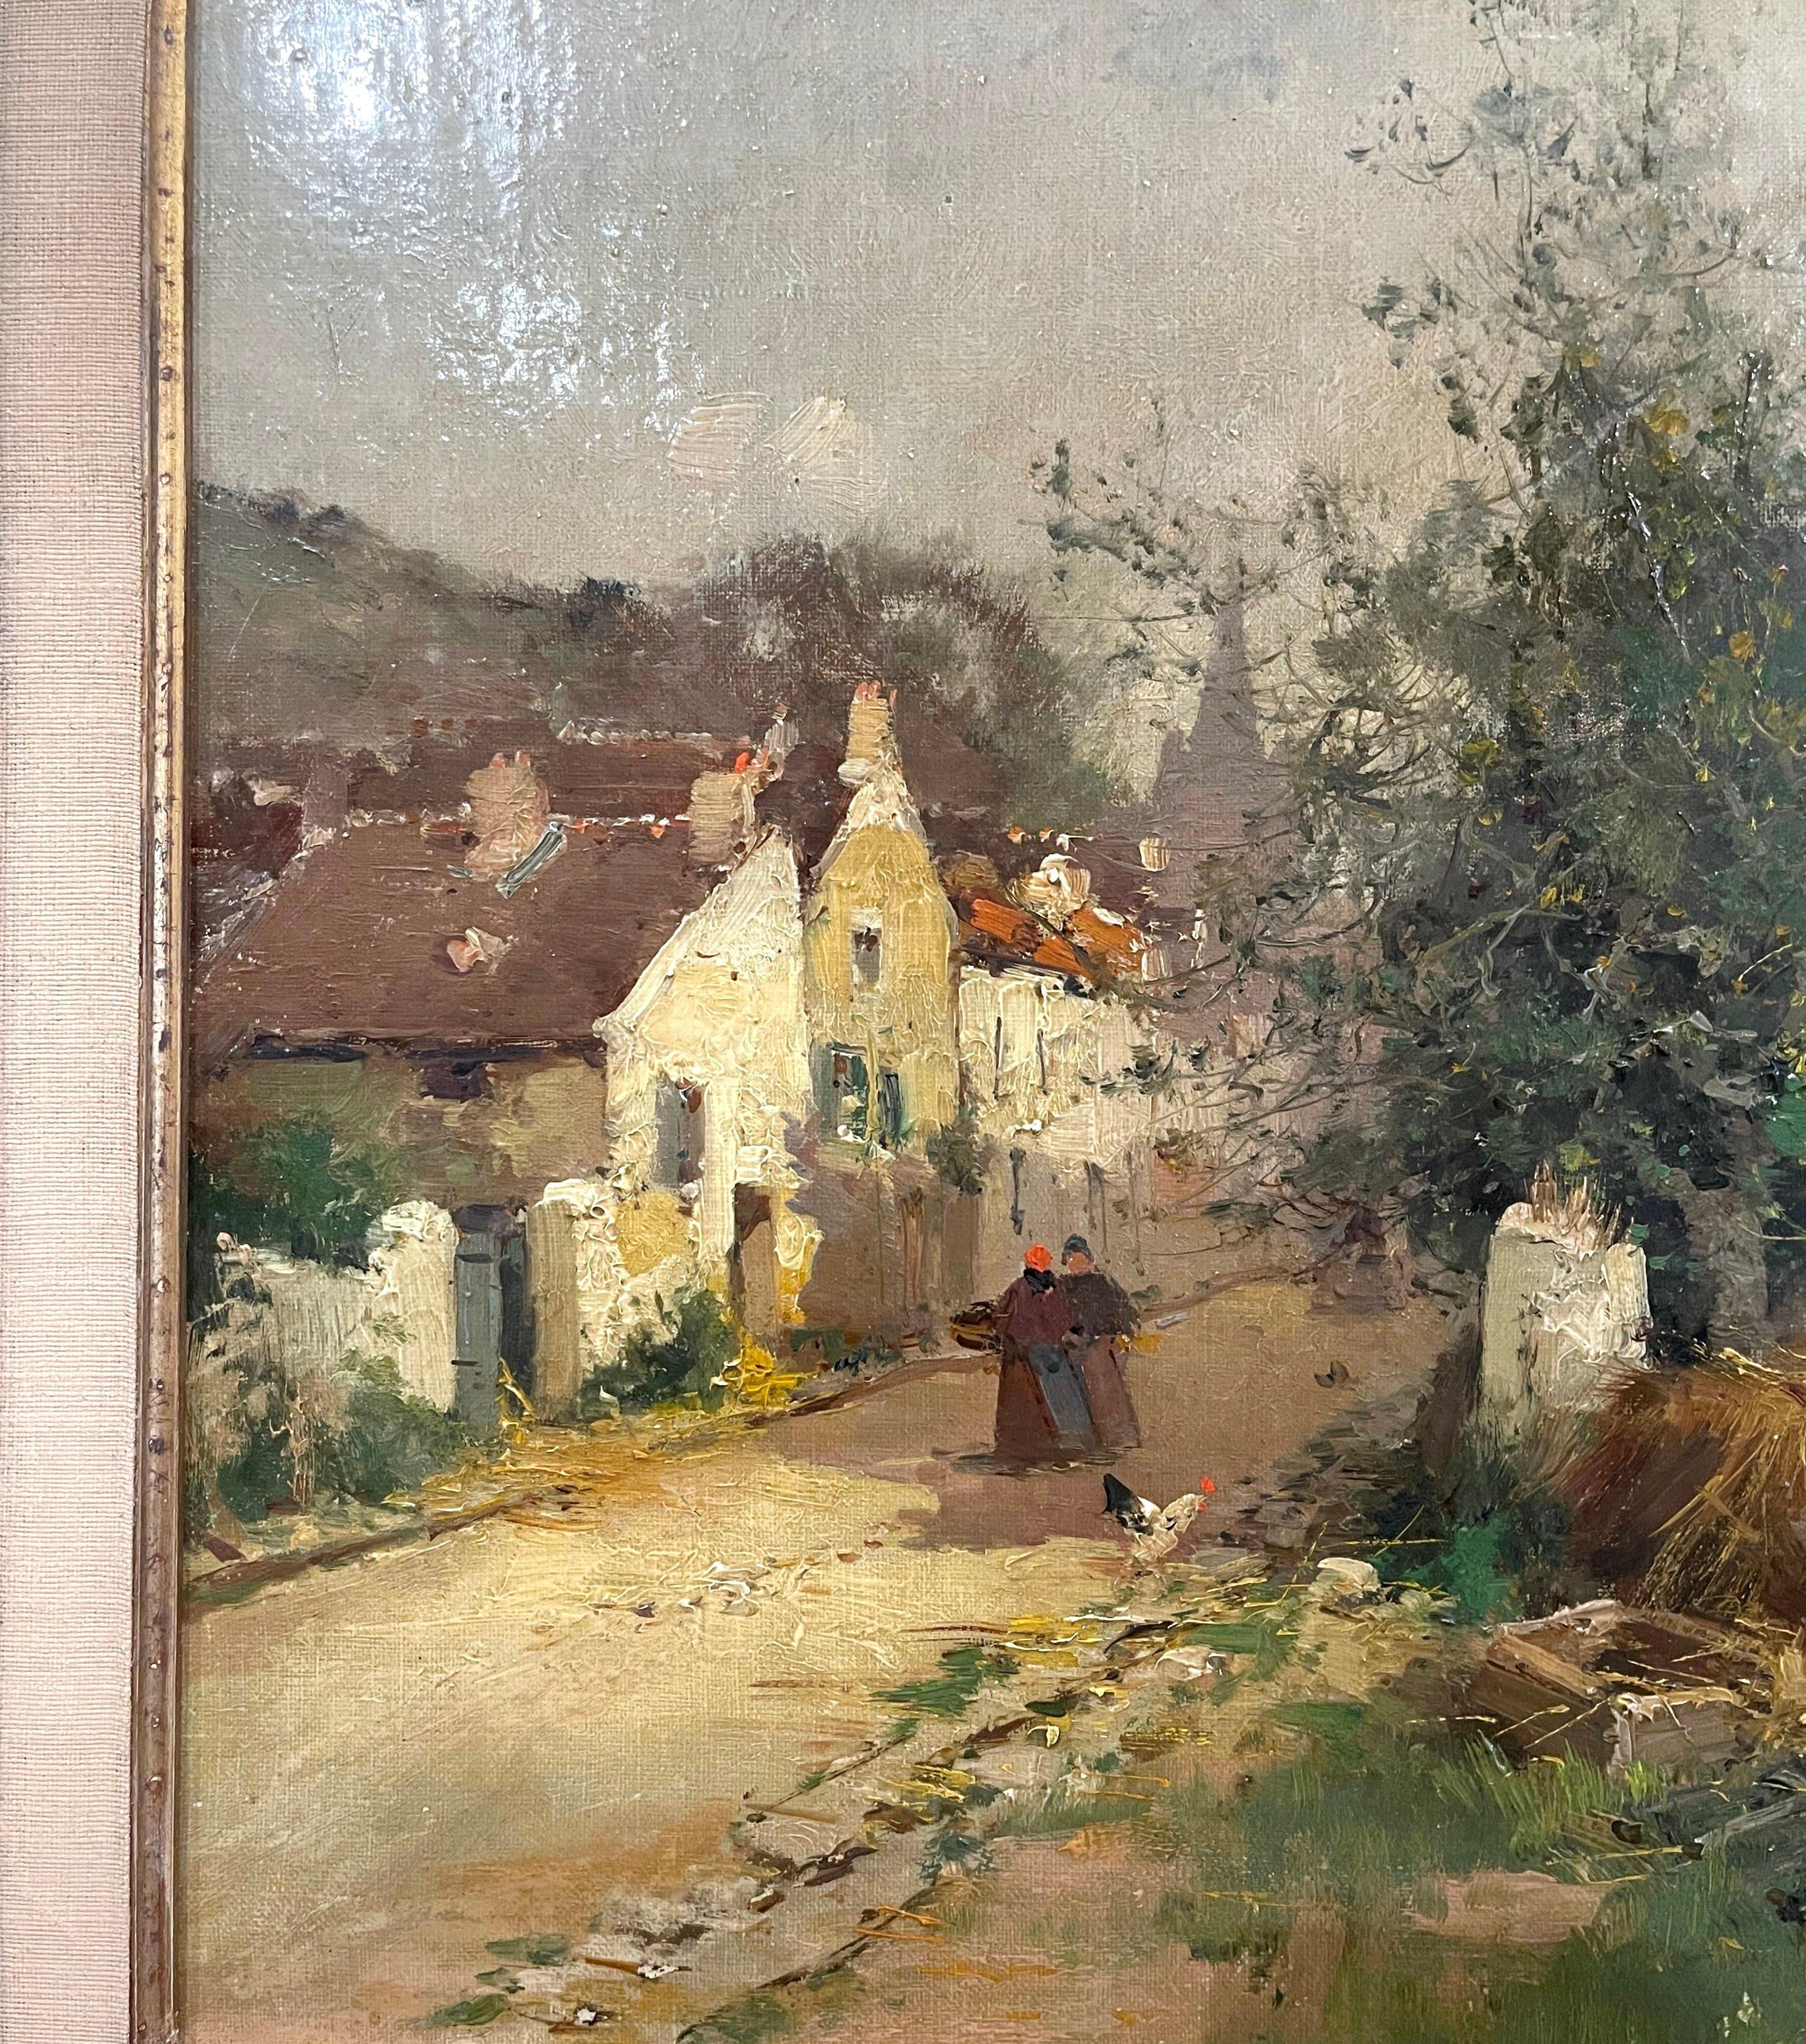 19th Century French Village Oil Painting on Canvas Signed E. Galien-Laloue In Excellent Condition For Sale In Dallas, TX